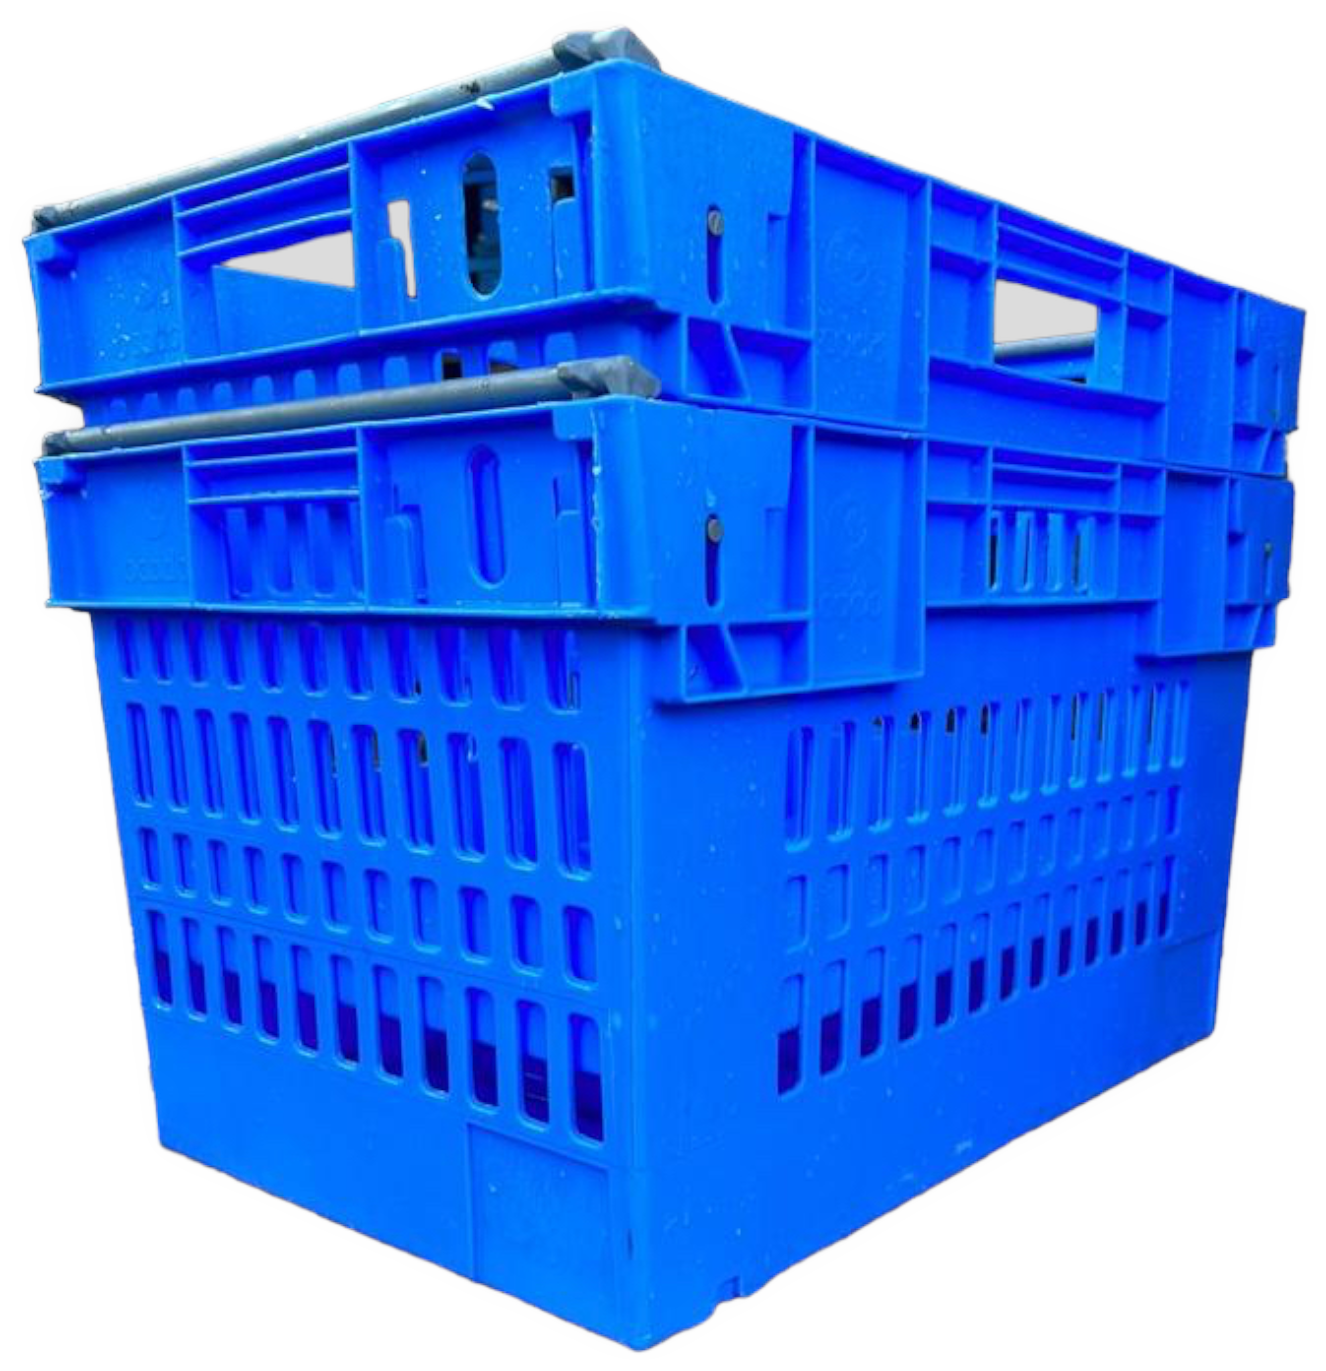 400x300x185 Bale Arm Crate Black 15LTR - Pack of 14